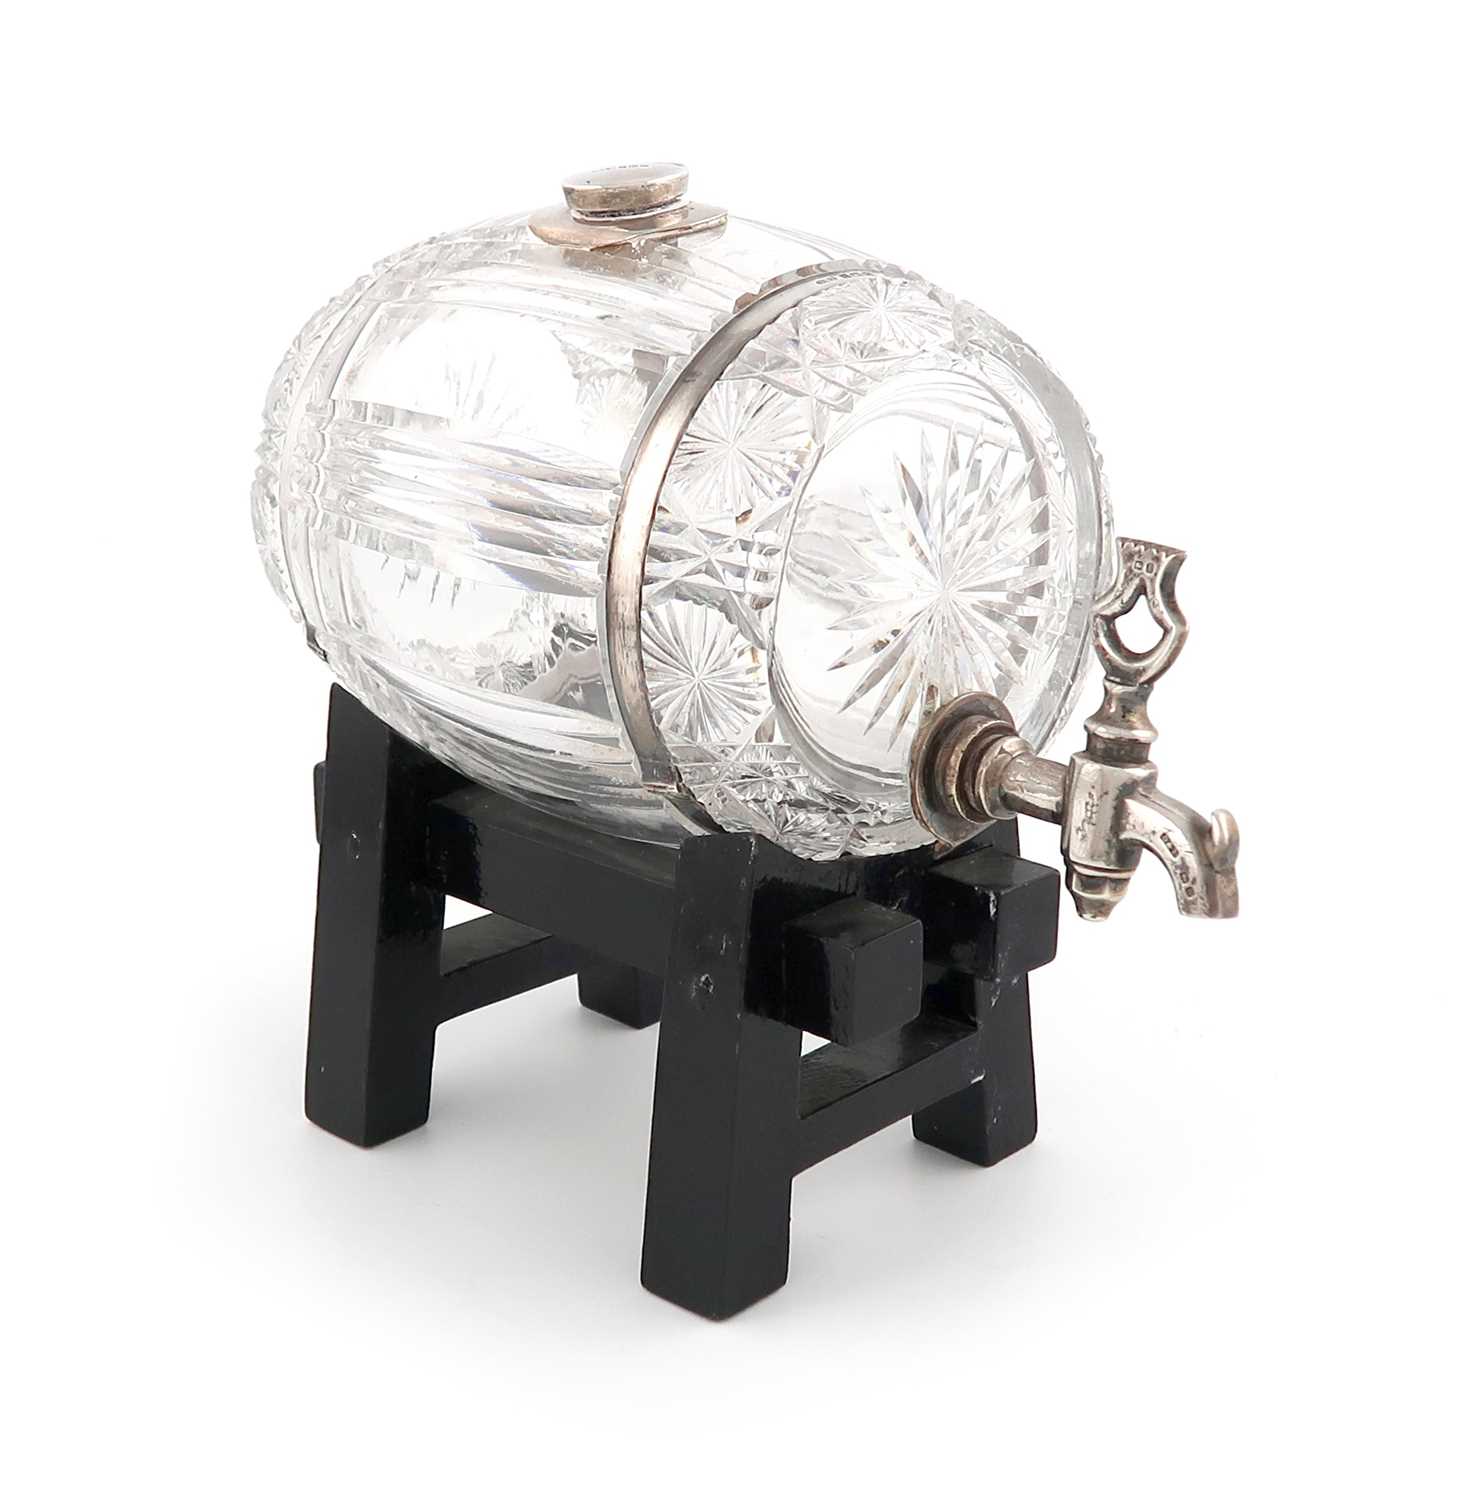 A silver-mounted cut-glass spirit barrel,by Docker and Burn Limited, Birmingham 1927,the barrel with